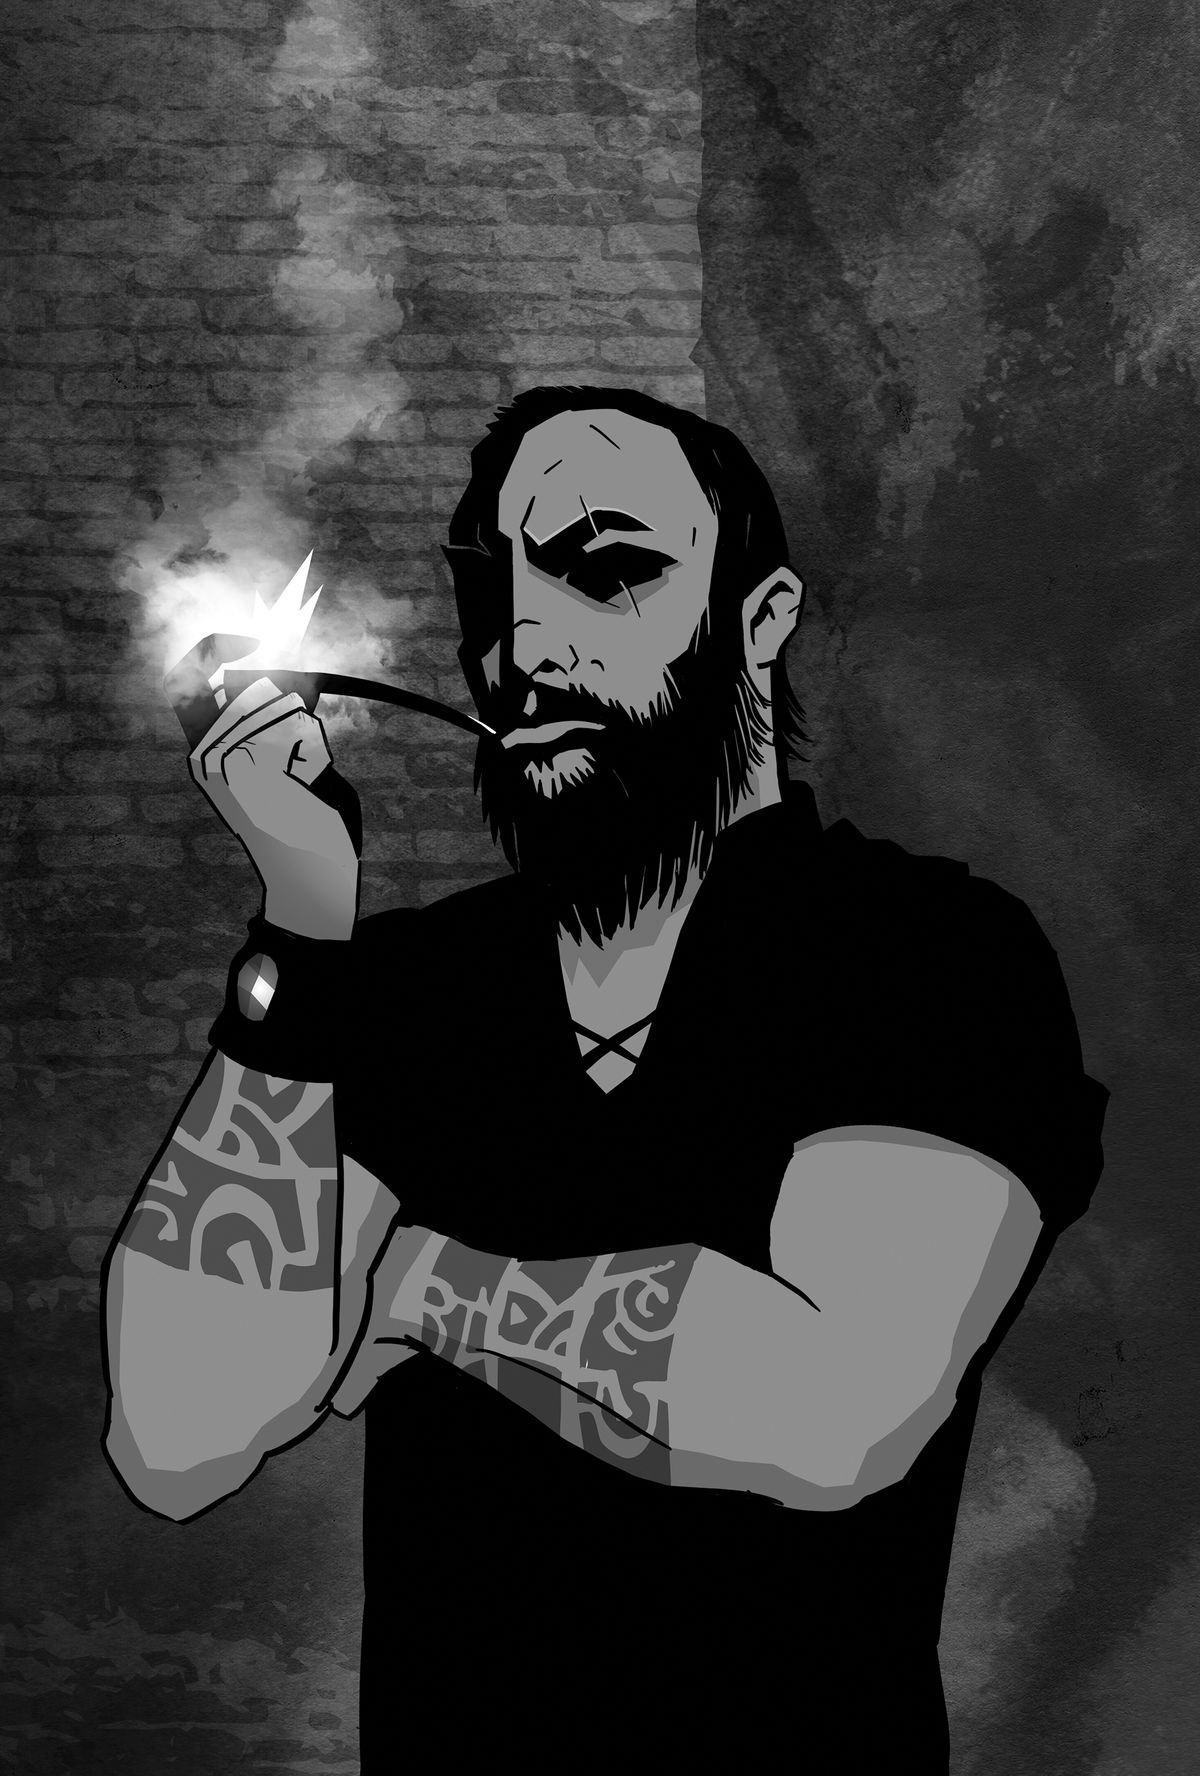 A man with tattoos on both wrists smokes a pipe.